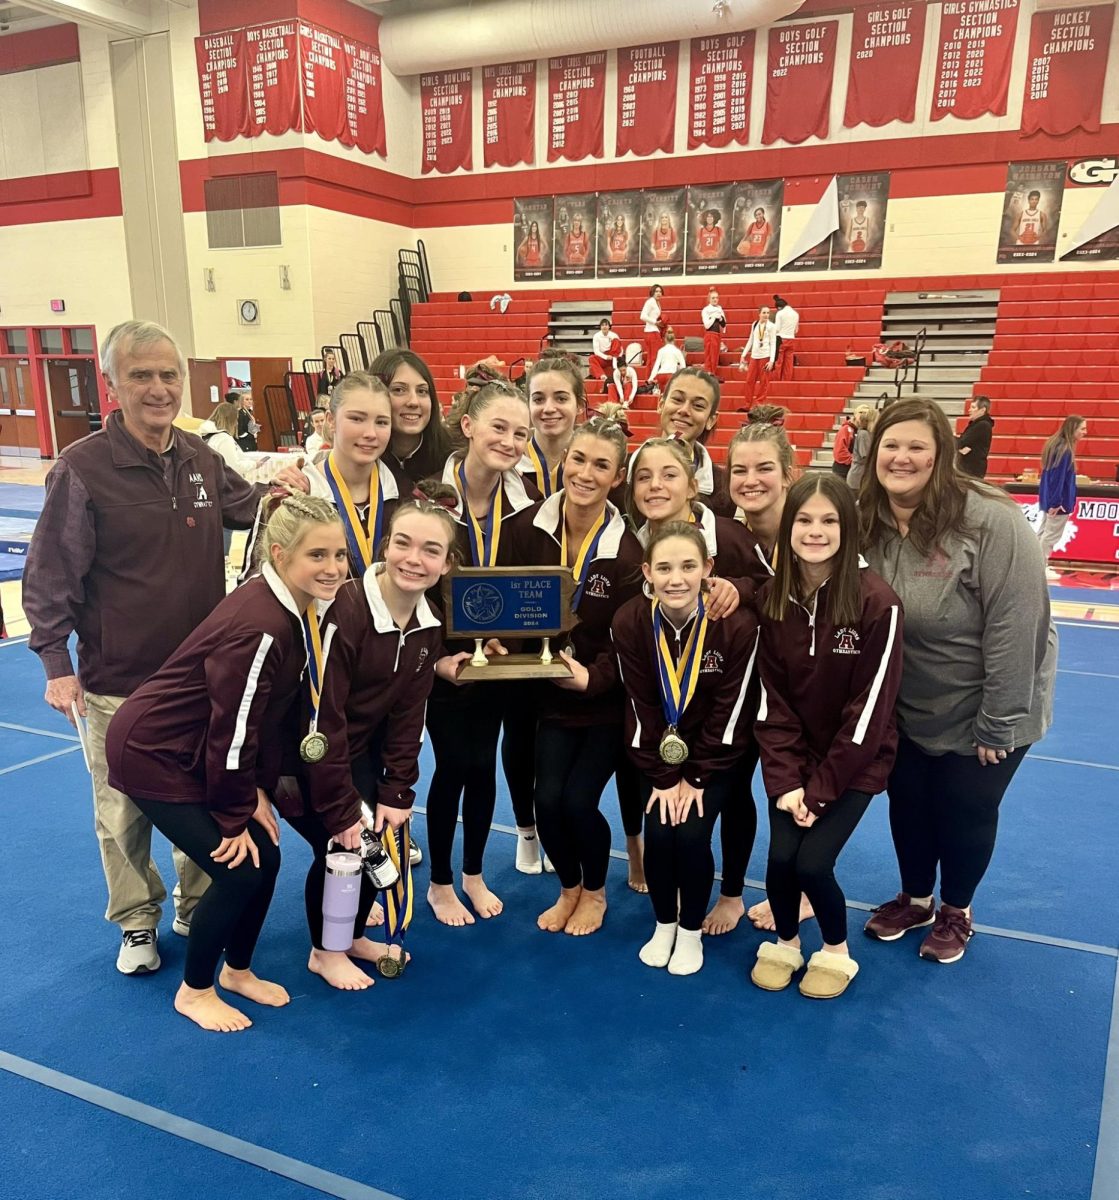 The best of the best. The gymnastics team poses for a photo together. The team took home first place at the State championship. (Courtesy of Isabella Bush)